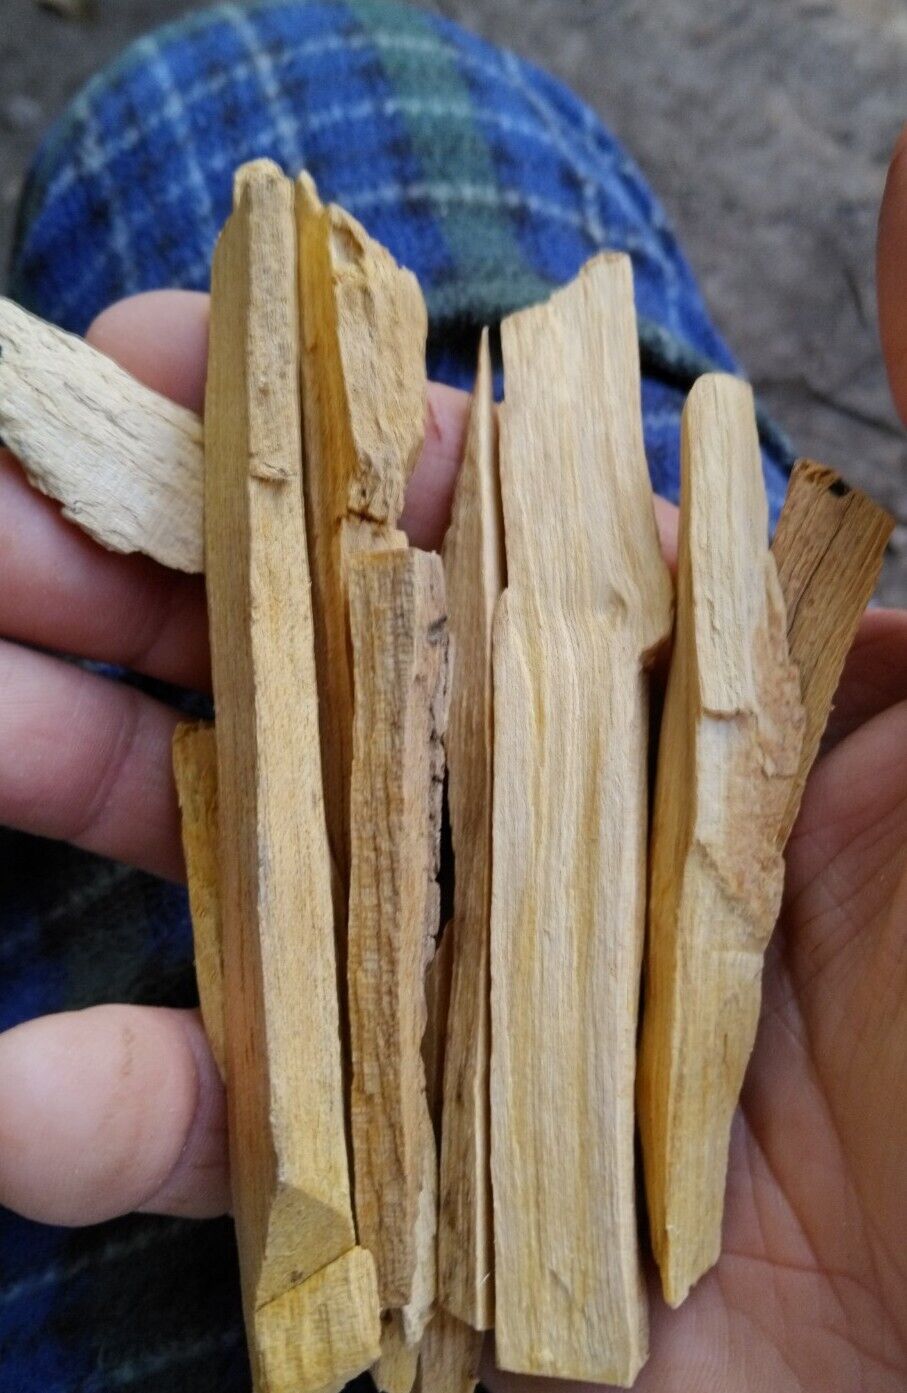 **AWESOME NATIVE AMERICAN PALO SANTO  FOR SMUDGING ONE QUART STARTER PACK **